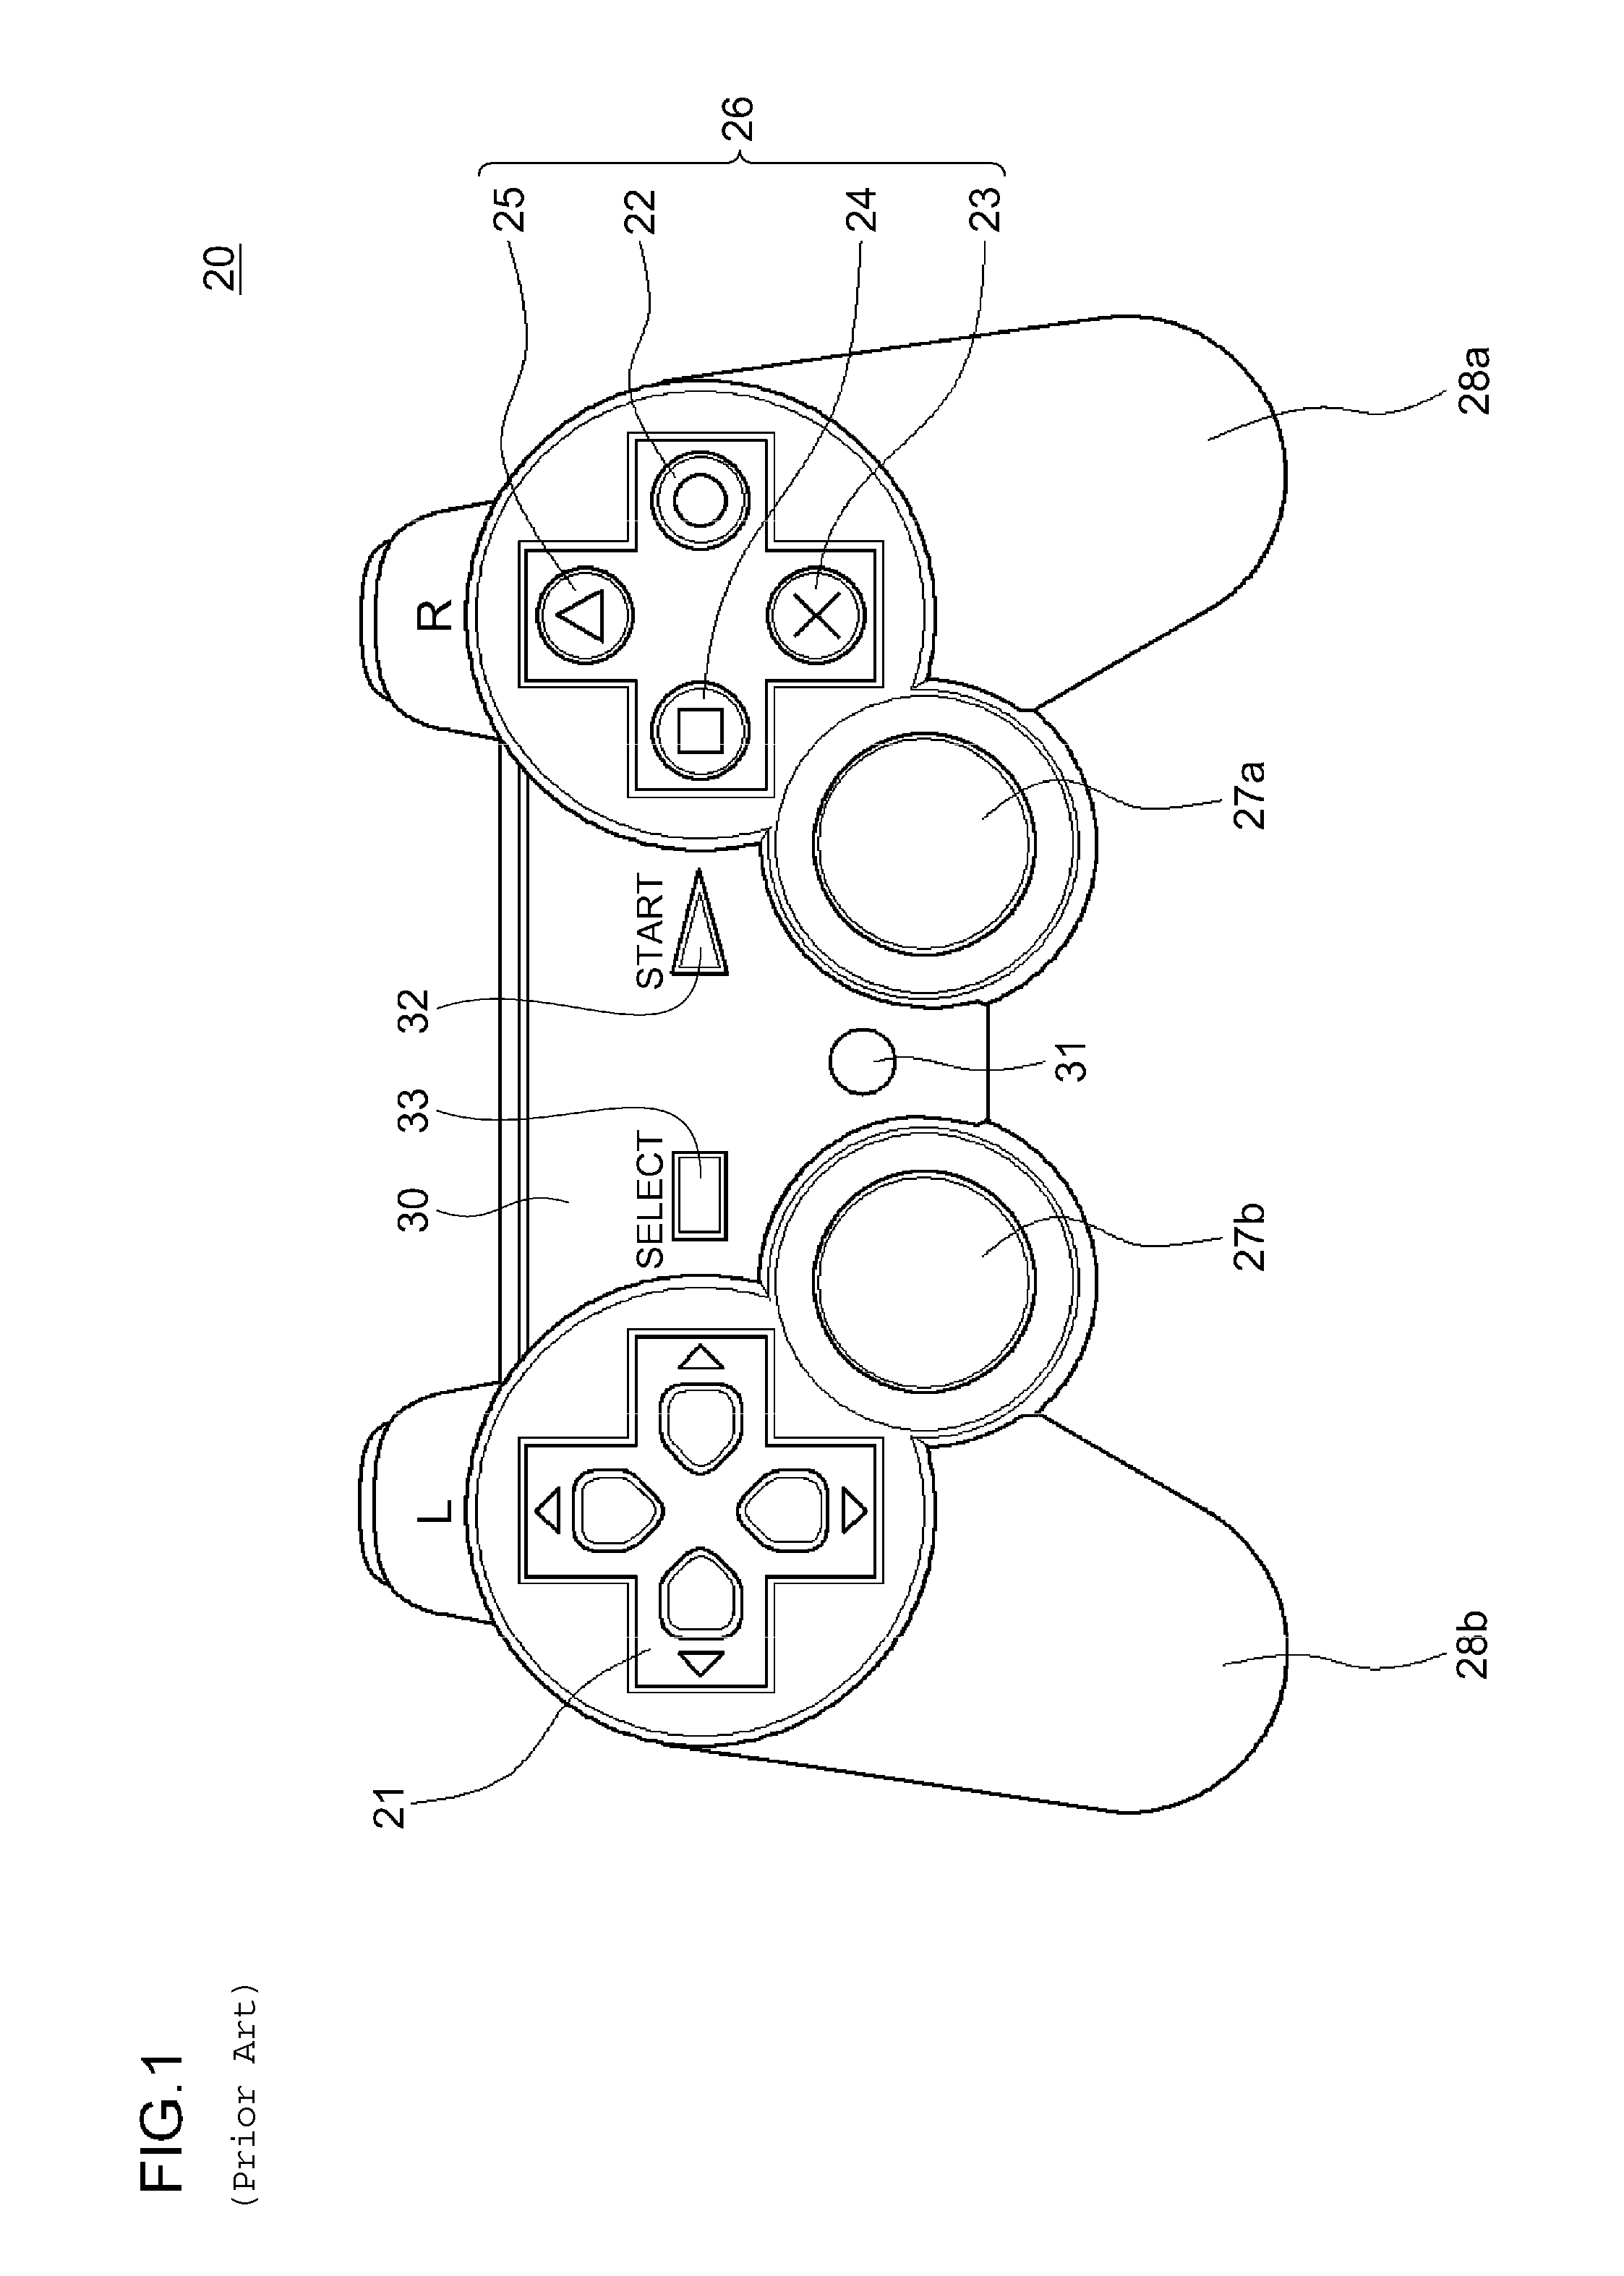 Keyboard equipped with functions of operation buttons and an analog stick provided in a game controller